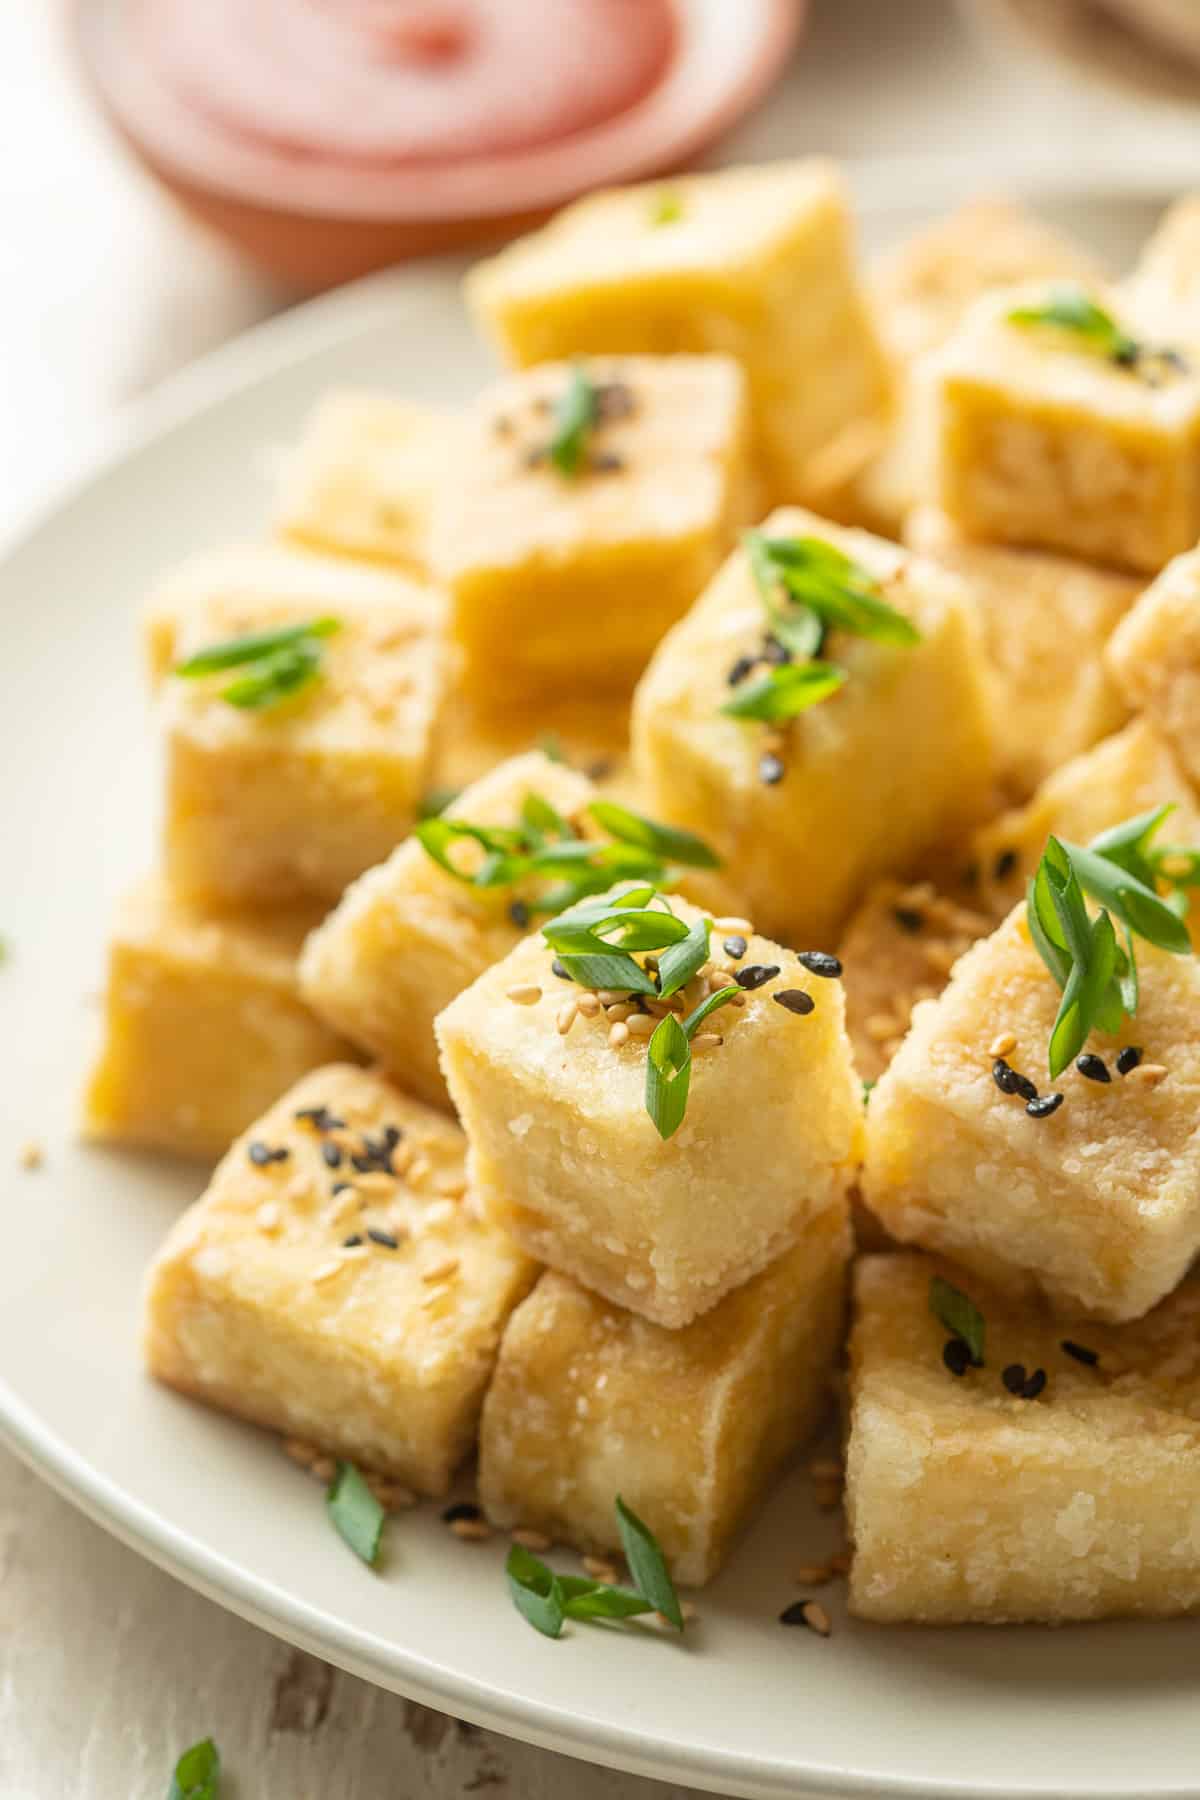 Plate of Fried Tofu cubes topped with chives and sesame seeds.